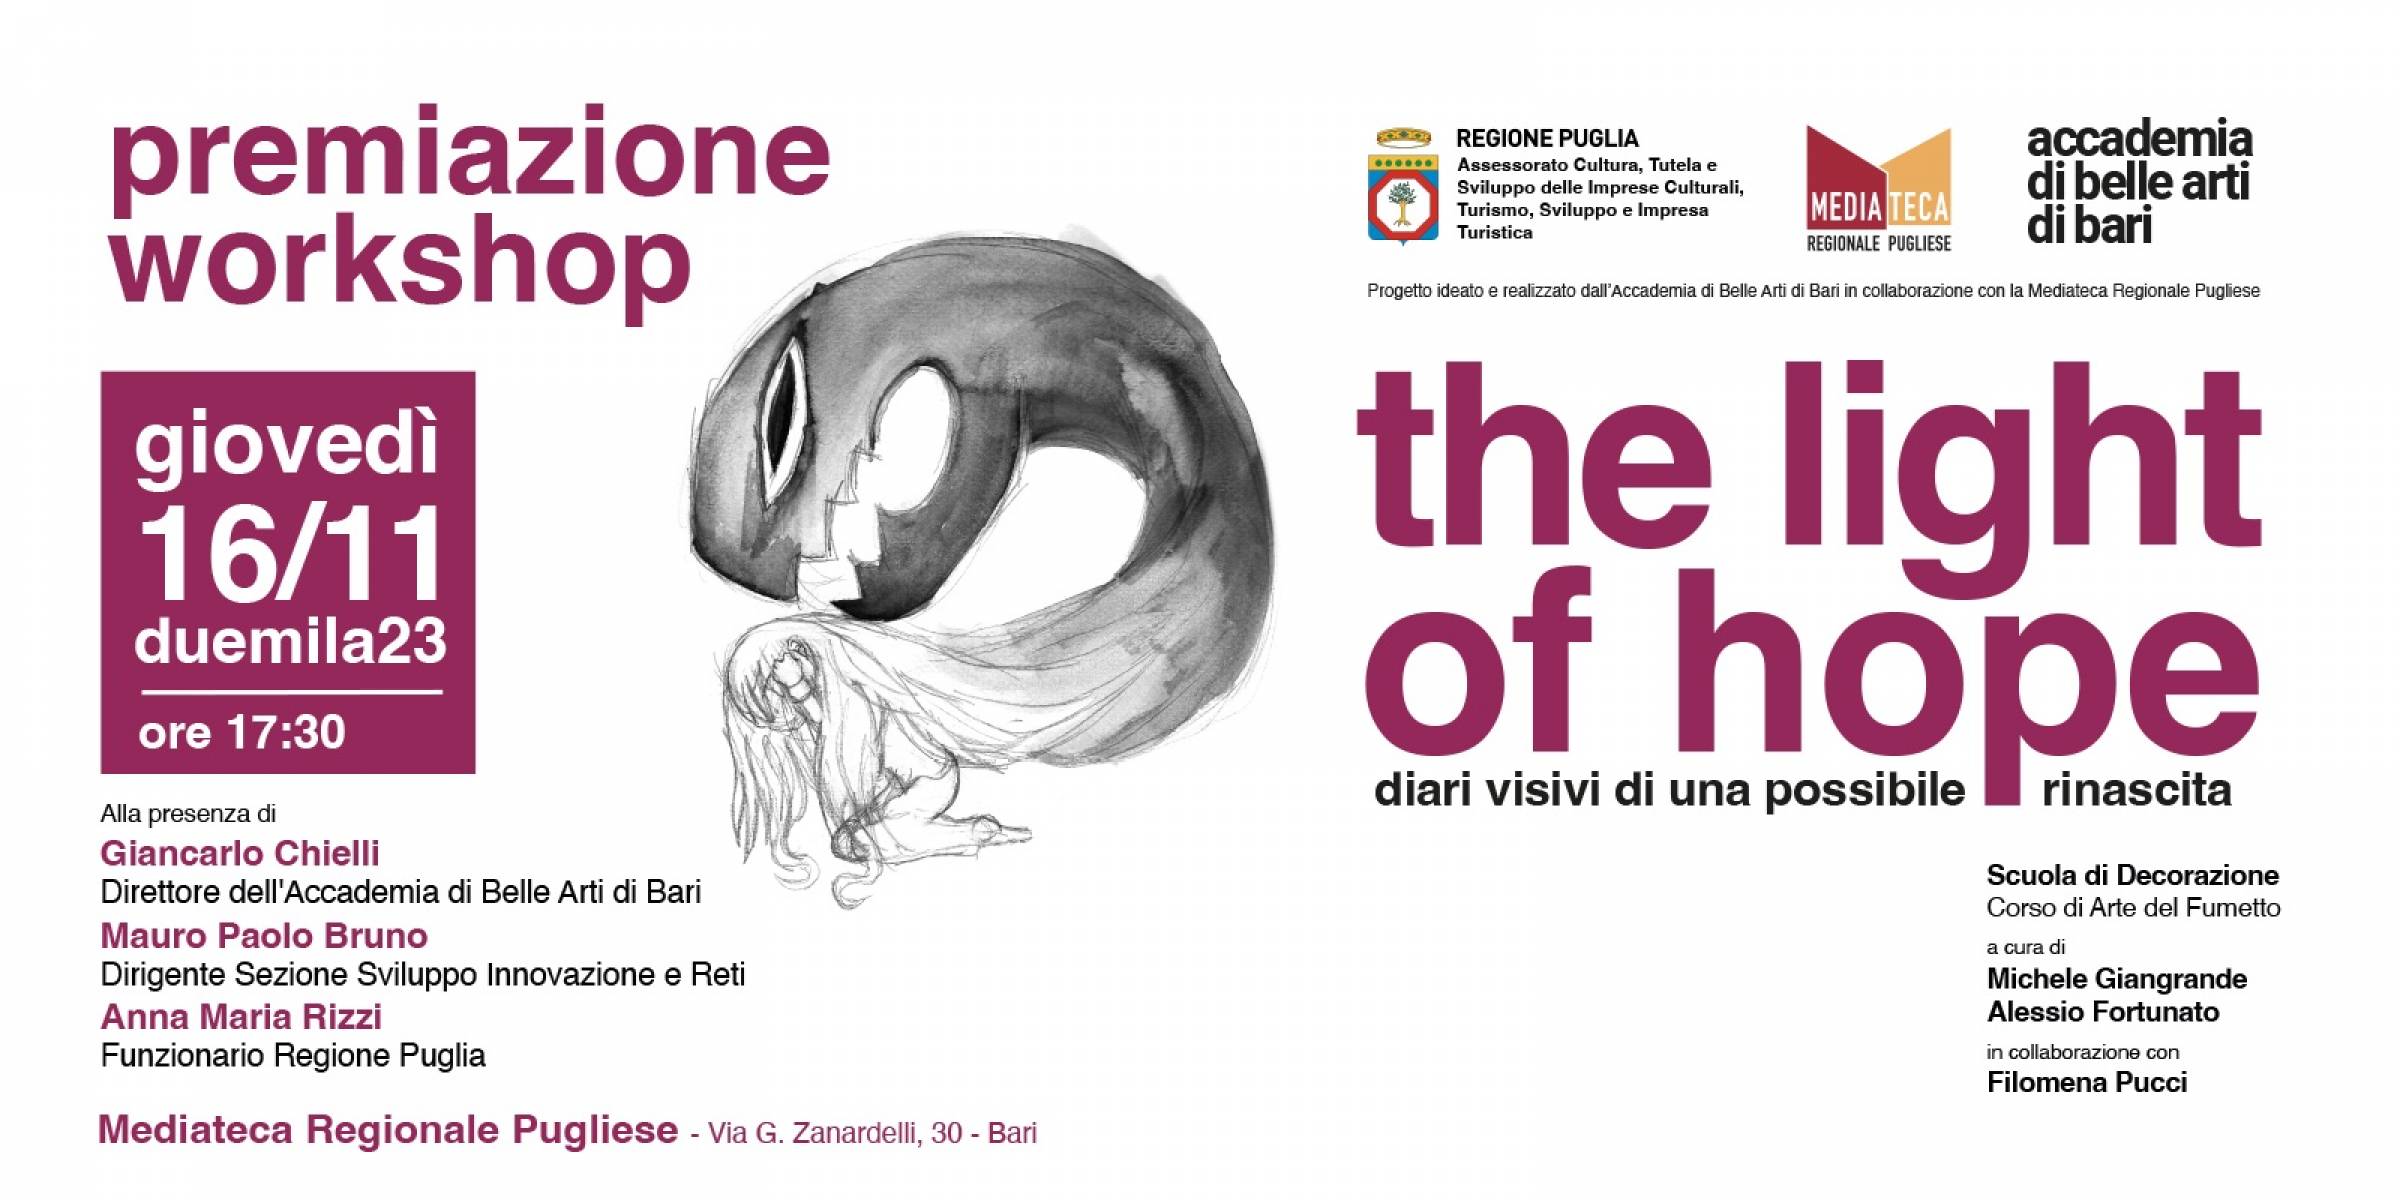 Premiazione workshop The light of hope giovedì 16/11